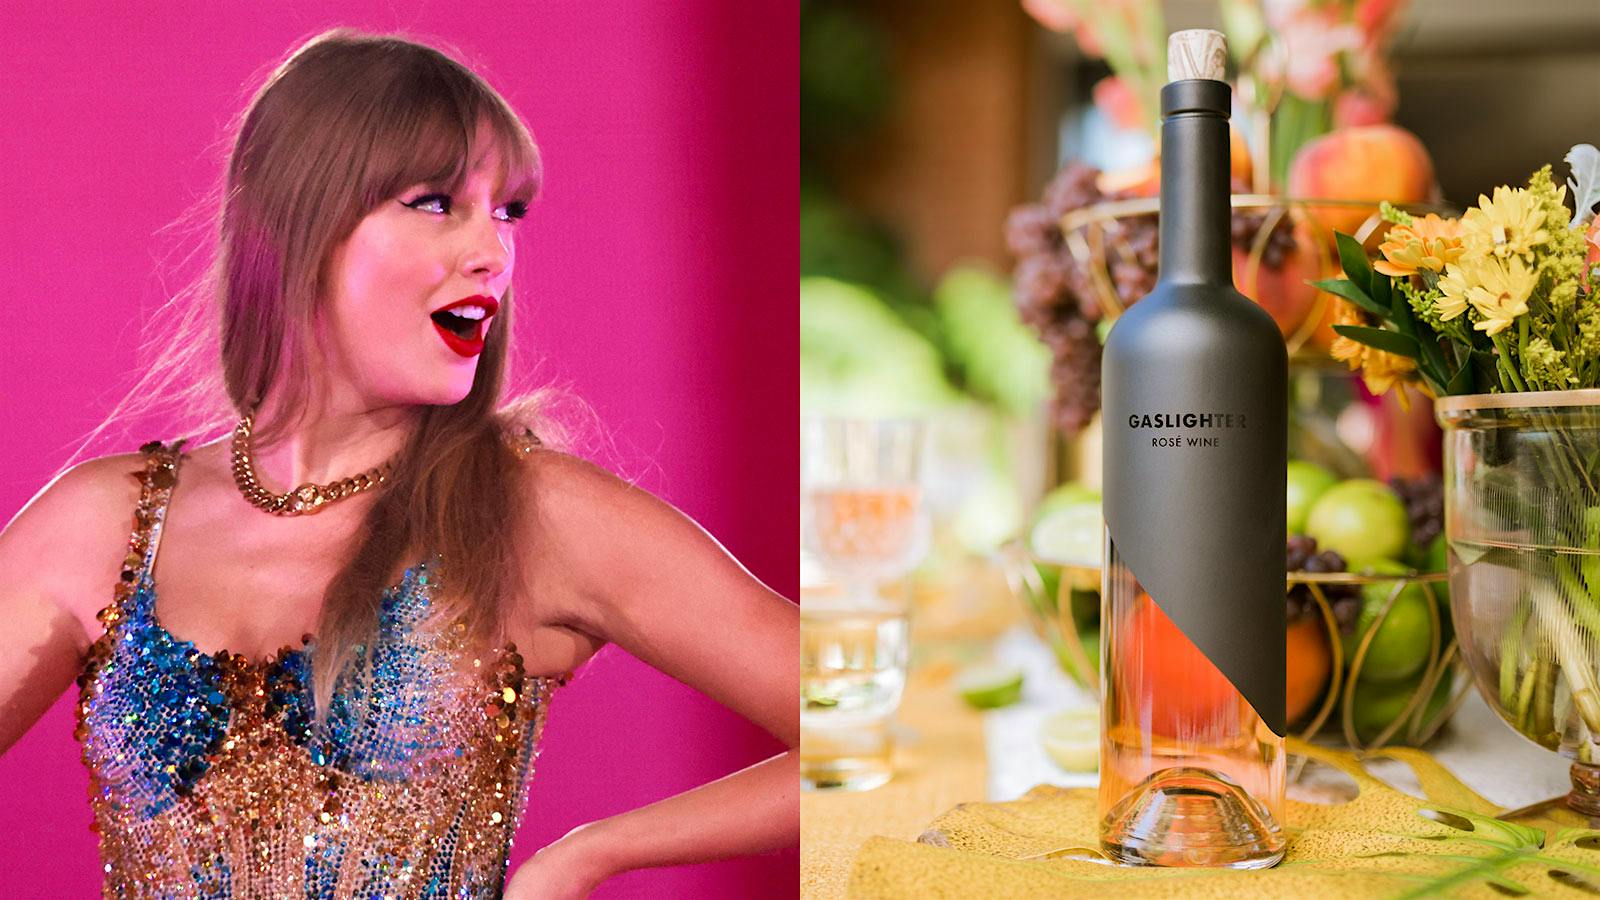 Fans Reacted To Too Much Of Alcoholics Wine And The Way Taylor Swift Used To Drunk To Stupor In Recent Time Majorly In The Public...